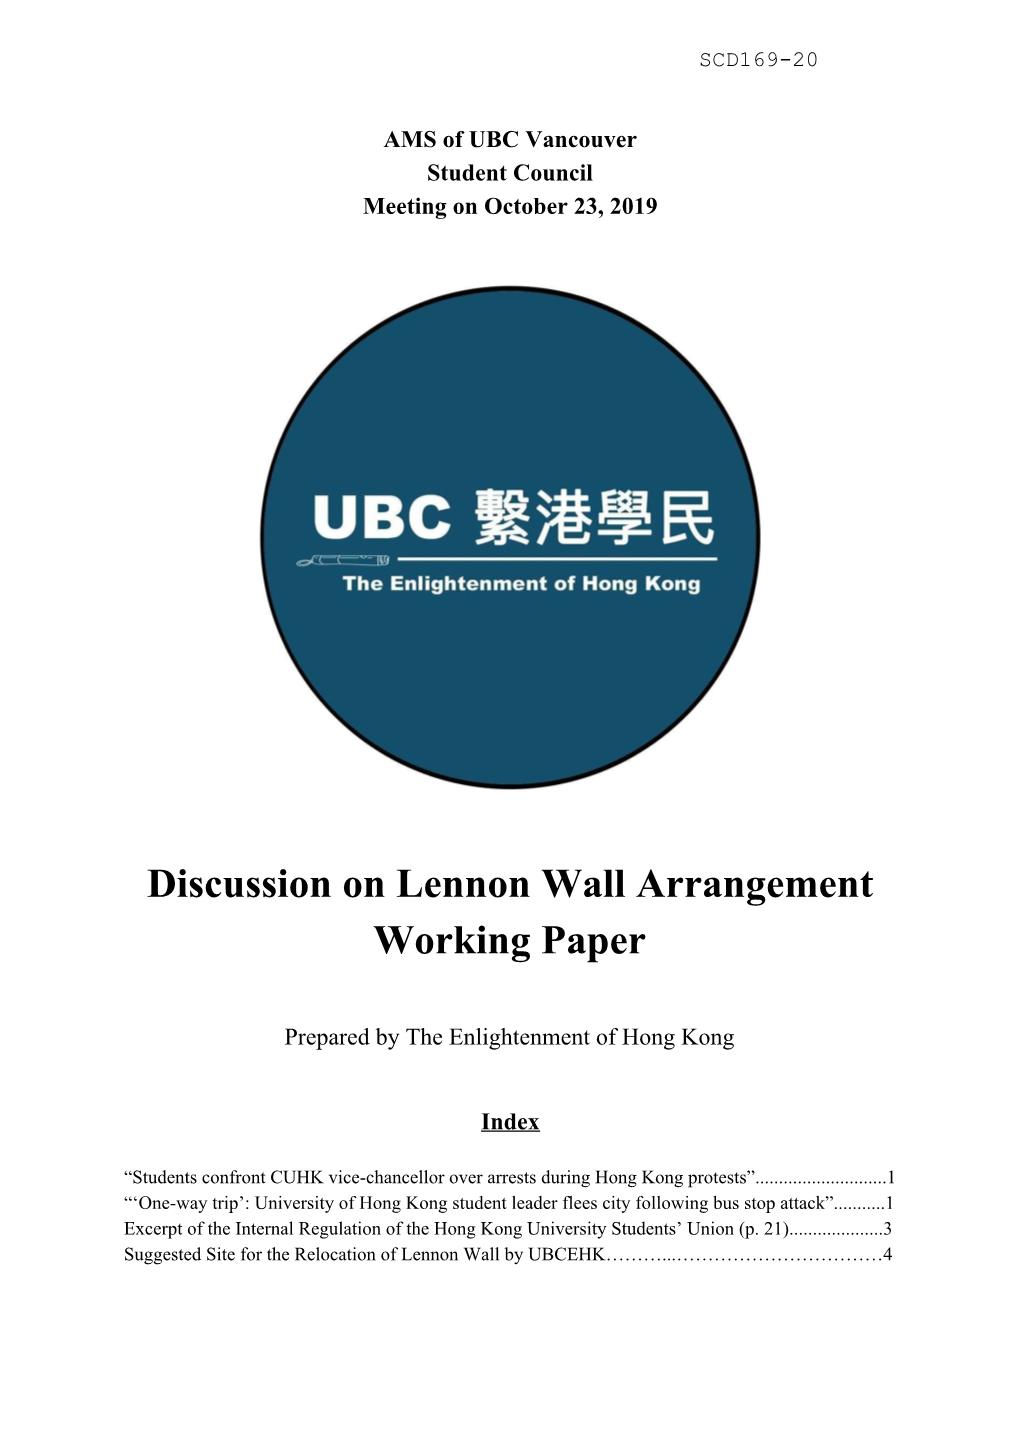 UBCEHK AMS Council Meeting Working Paper